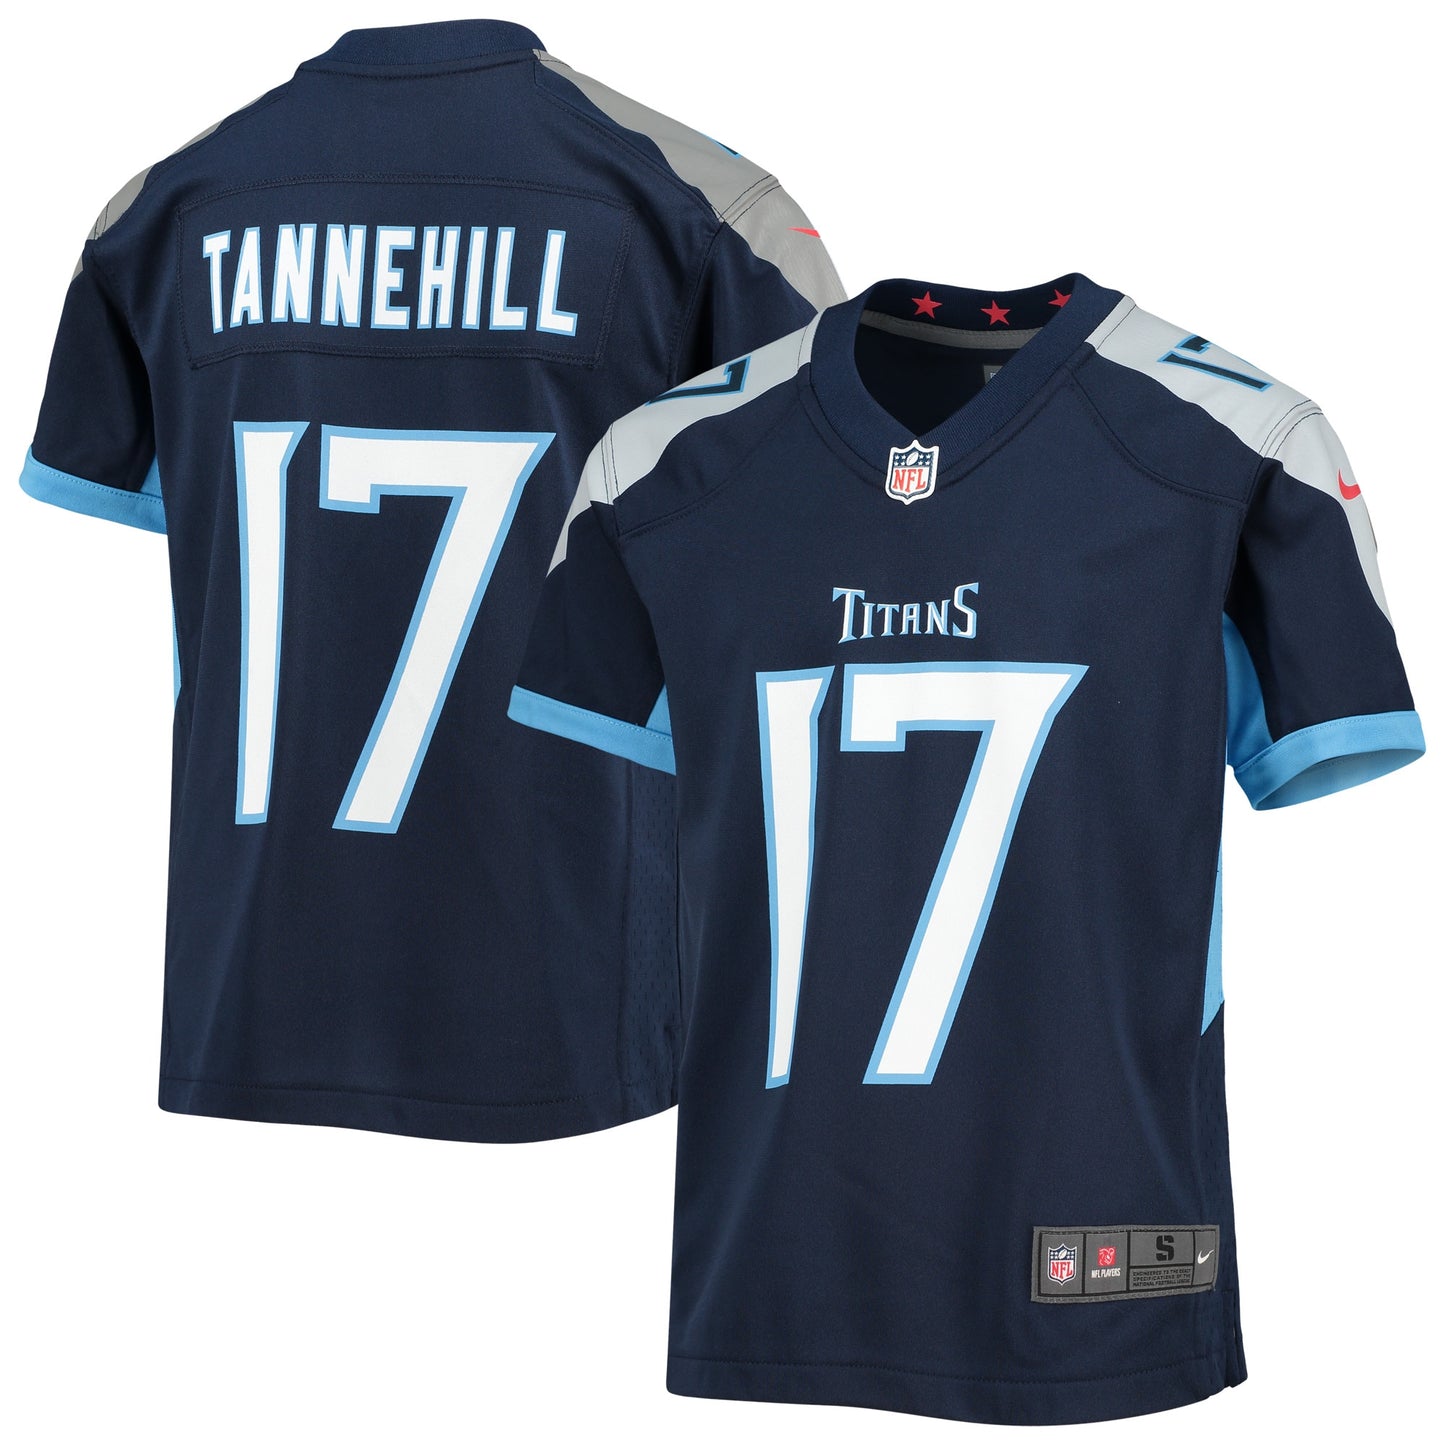 Ryan Tannehill Tennessee Titans Nike Youth Game Jersey - Navy